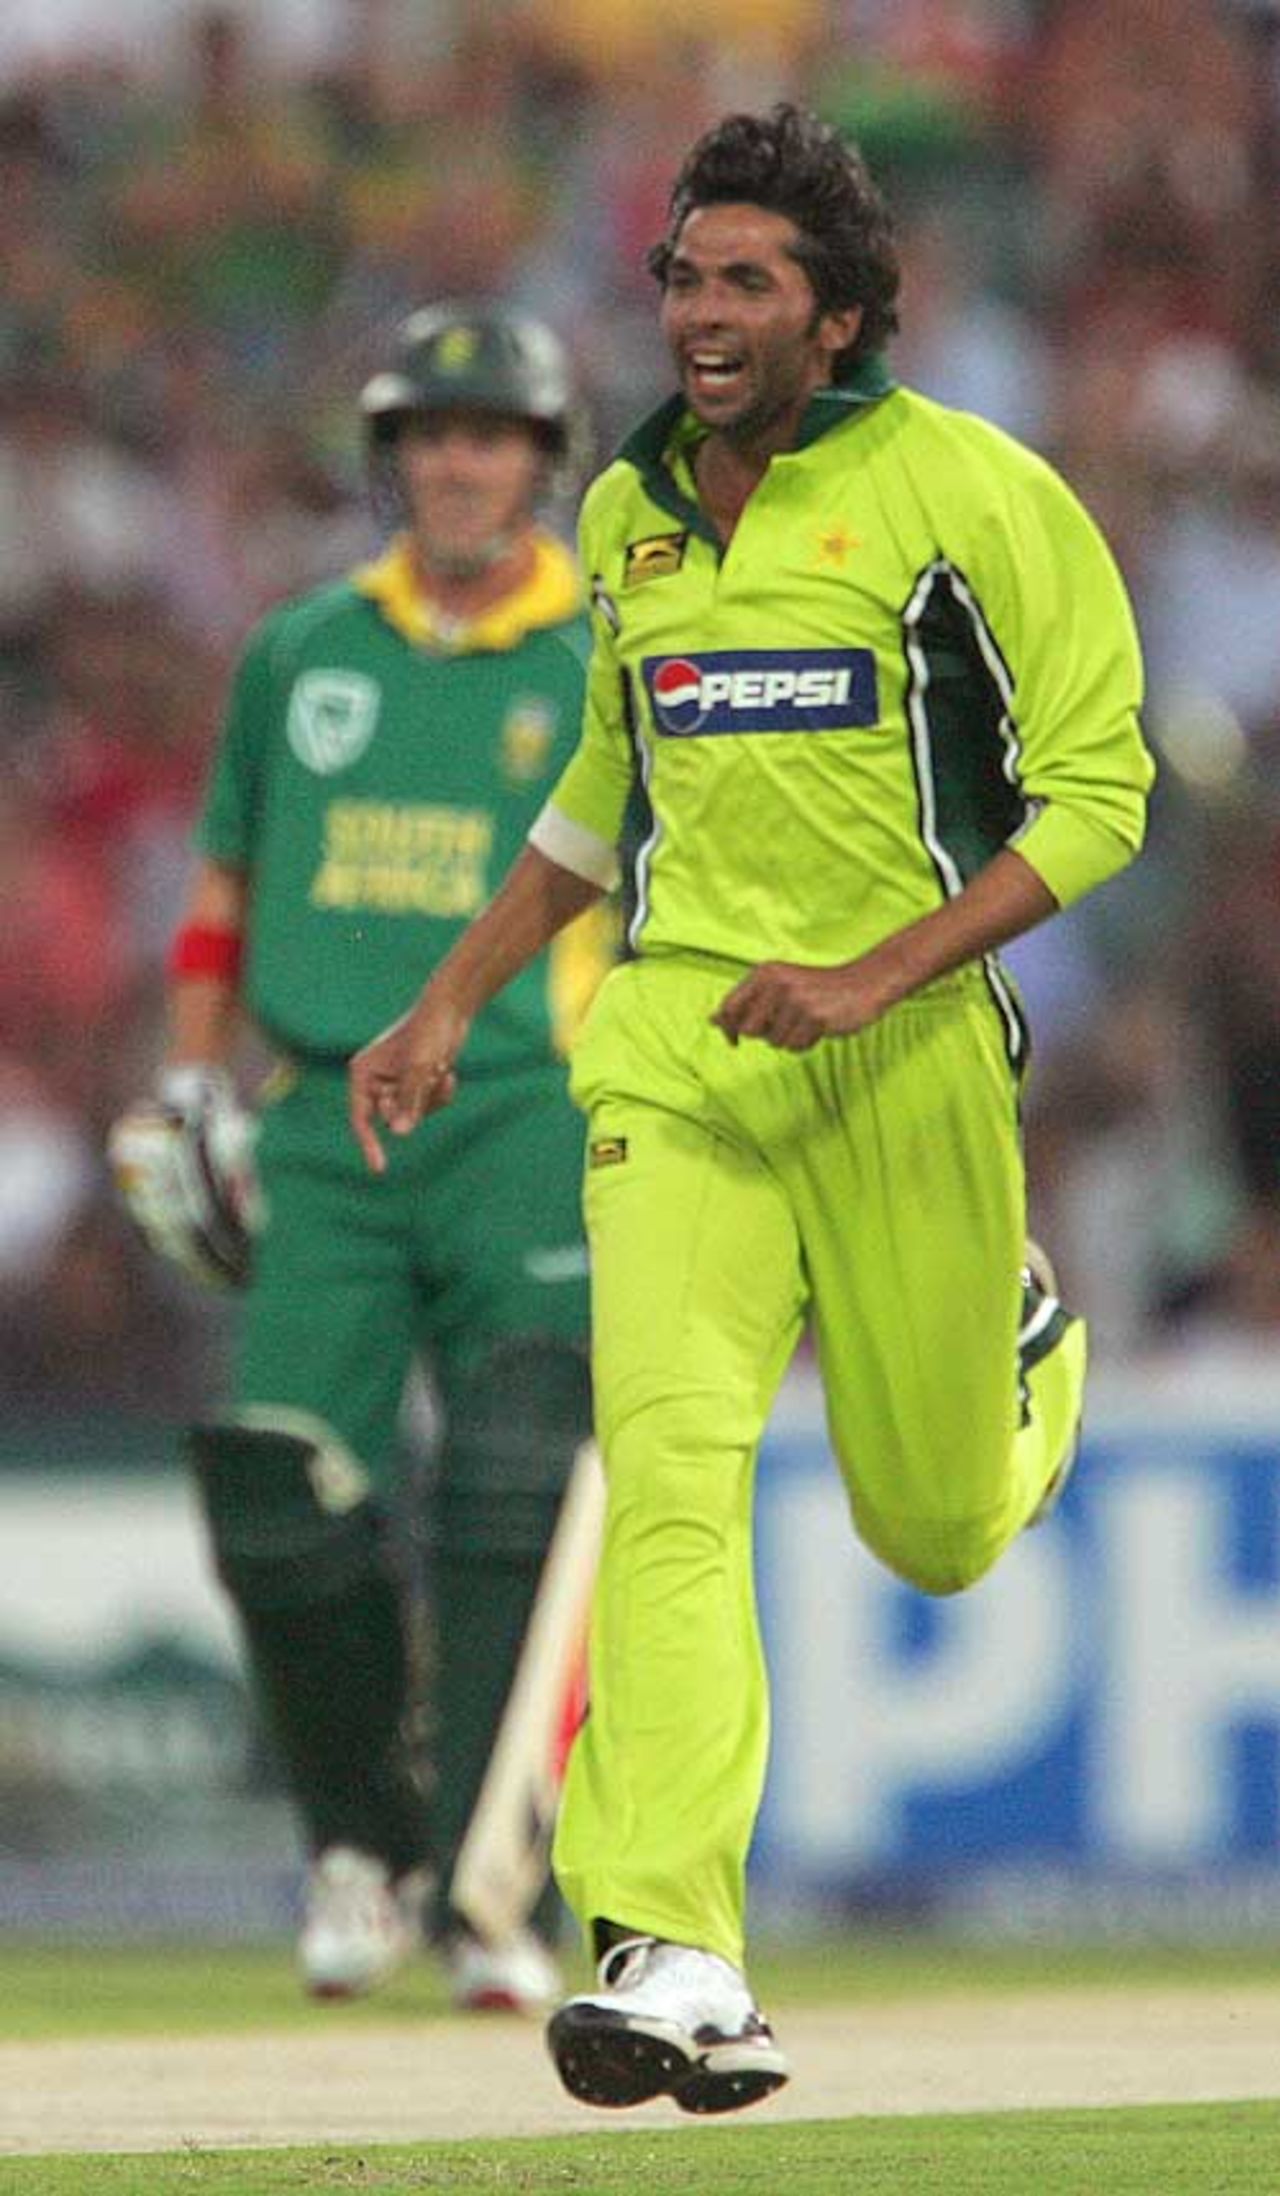 Mohammad Asif ended the tour as he started...Pakistan's stand-out bowler, South Africa v Pakistan, 5th ODI, Johannesburg, February 14, 2007